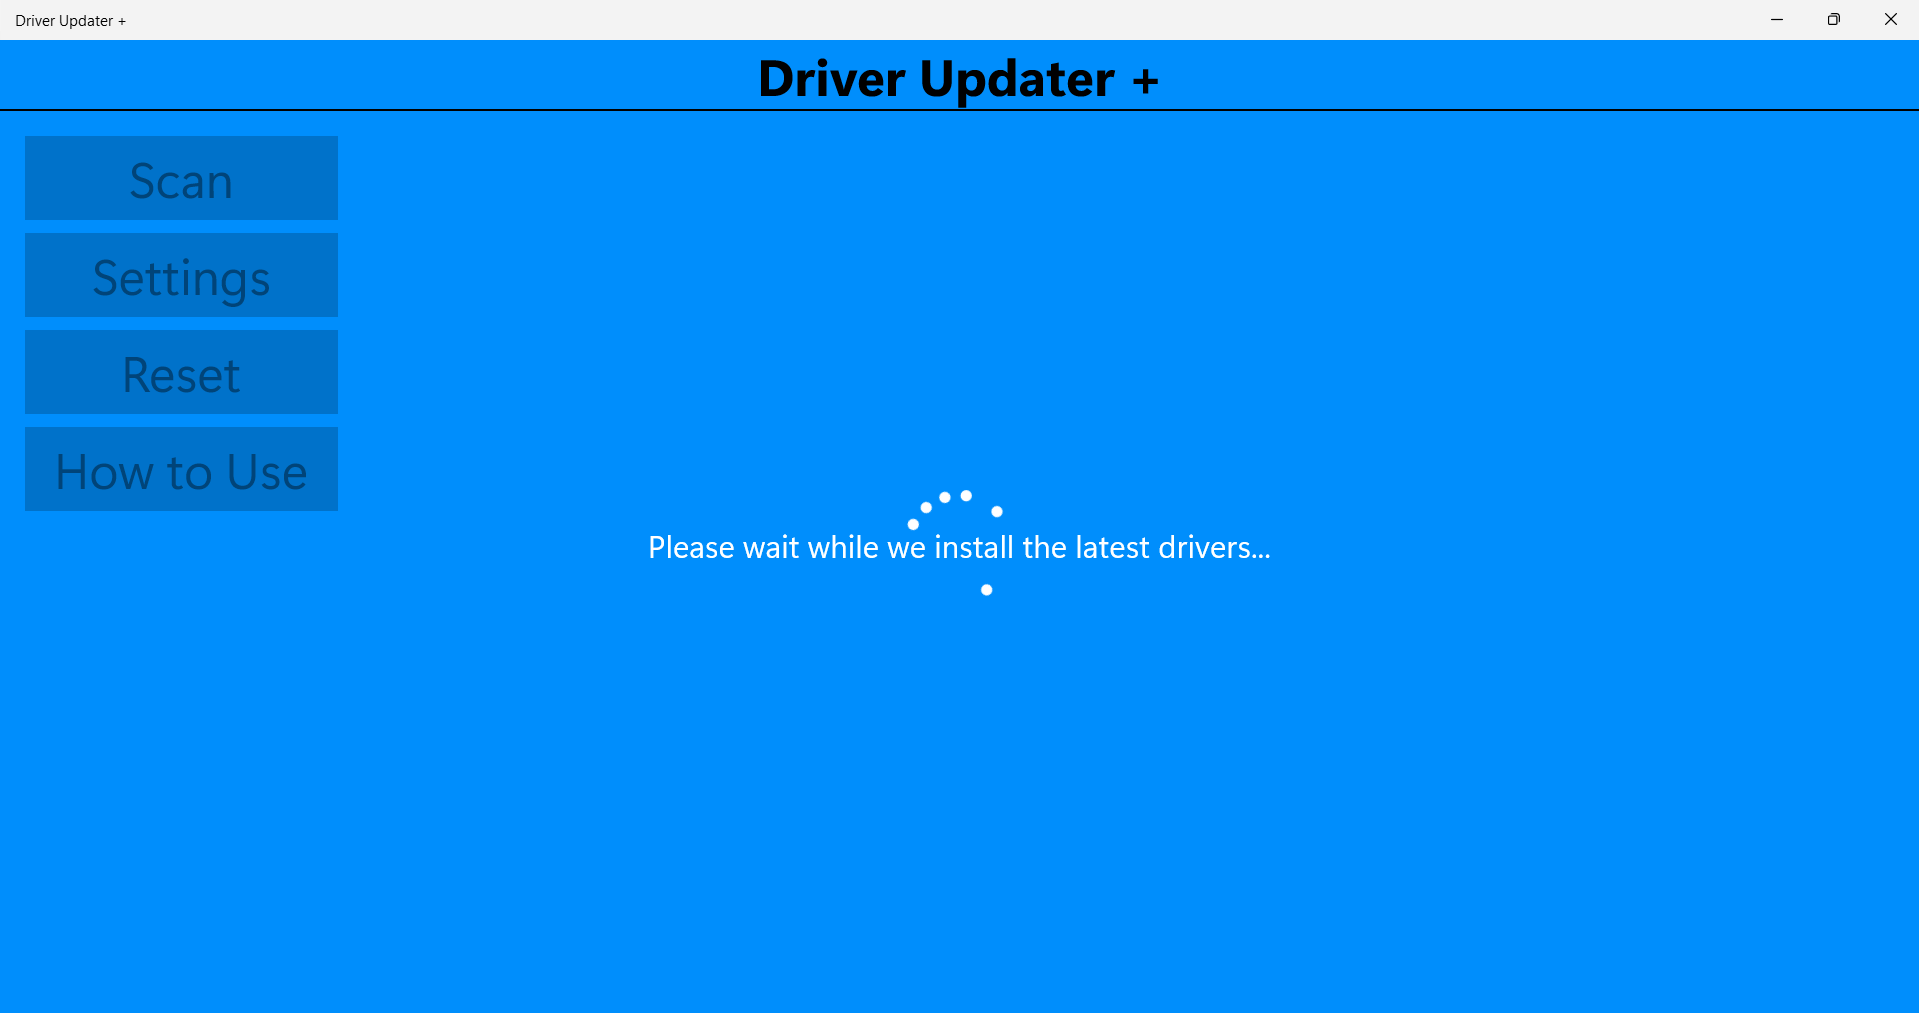 Installing the Latest Drivers